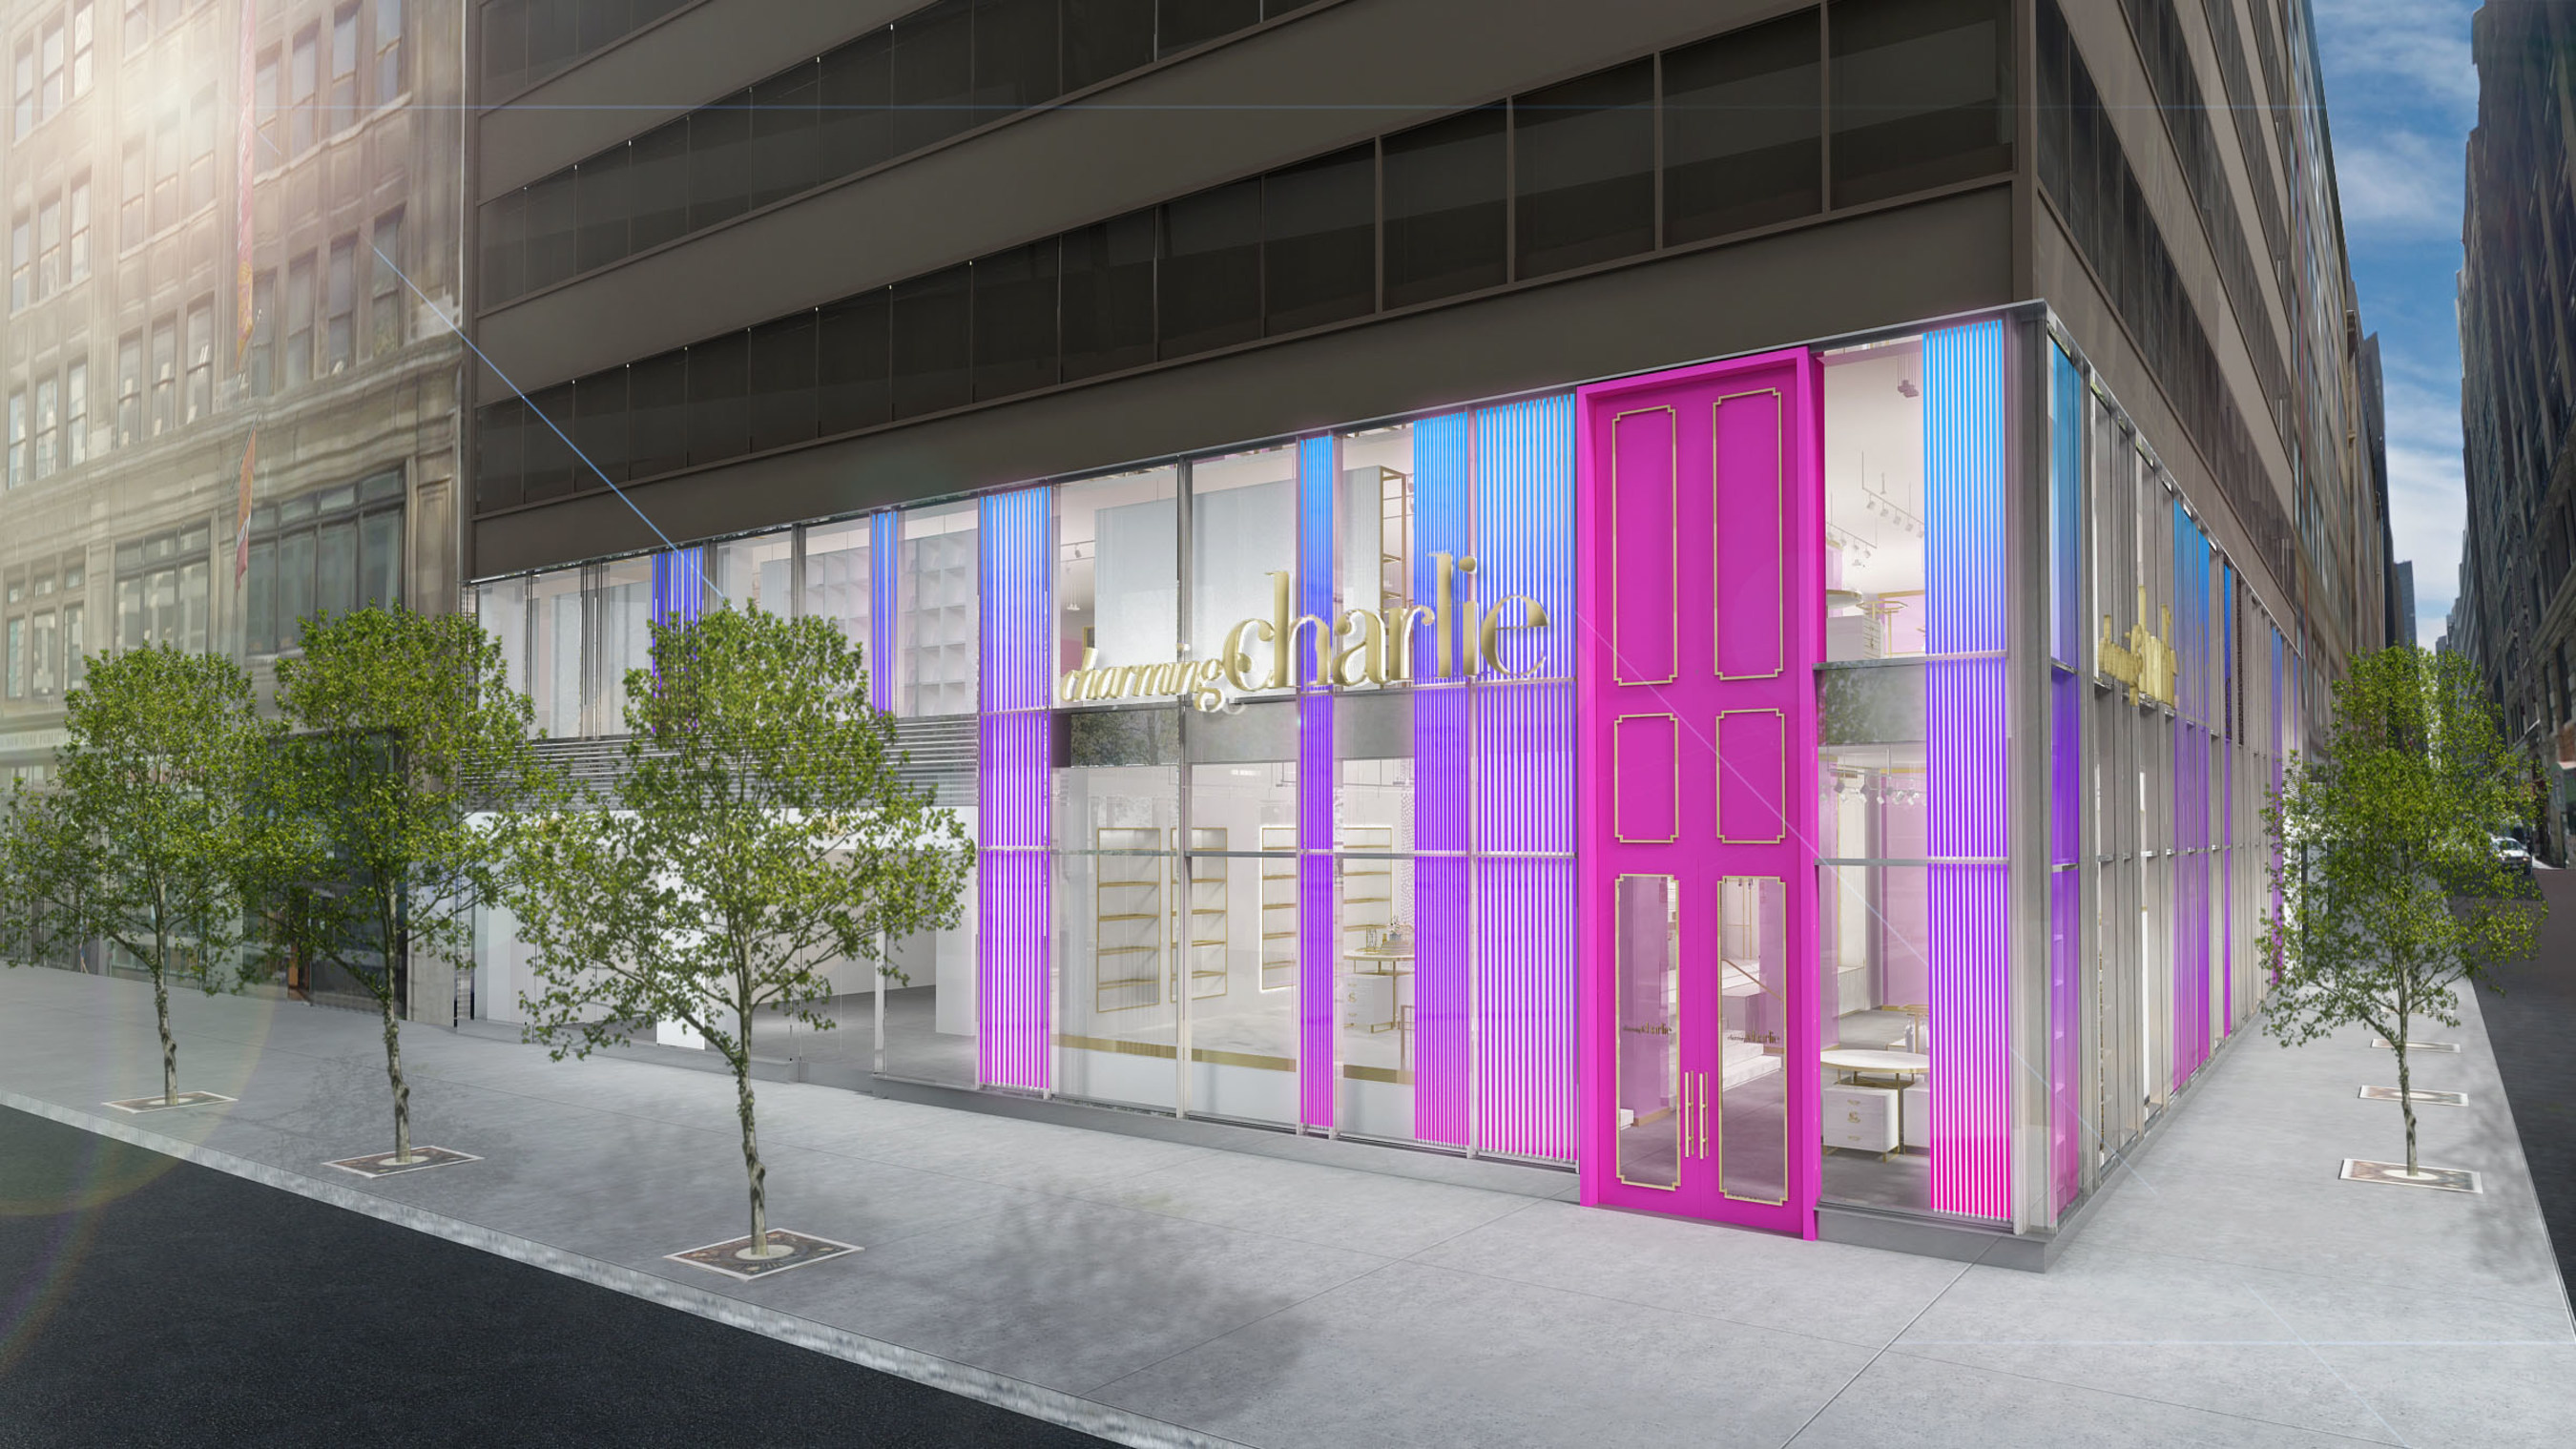 Exterior rendering of Charming Charlie's New York Flagship scheduled to open in April 2015